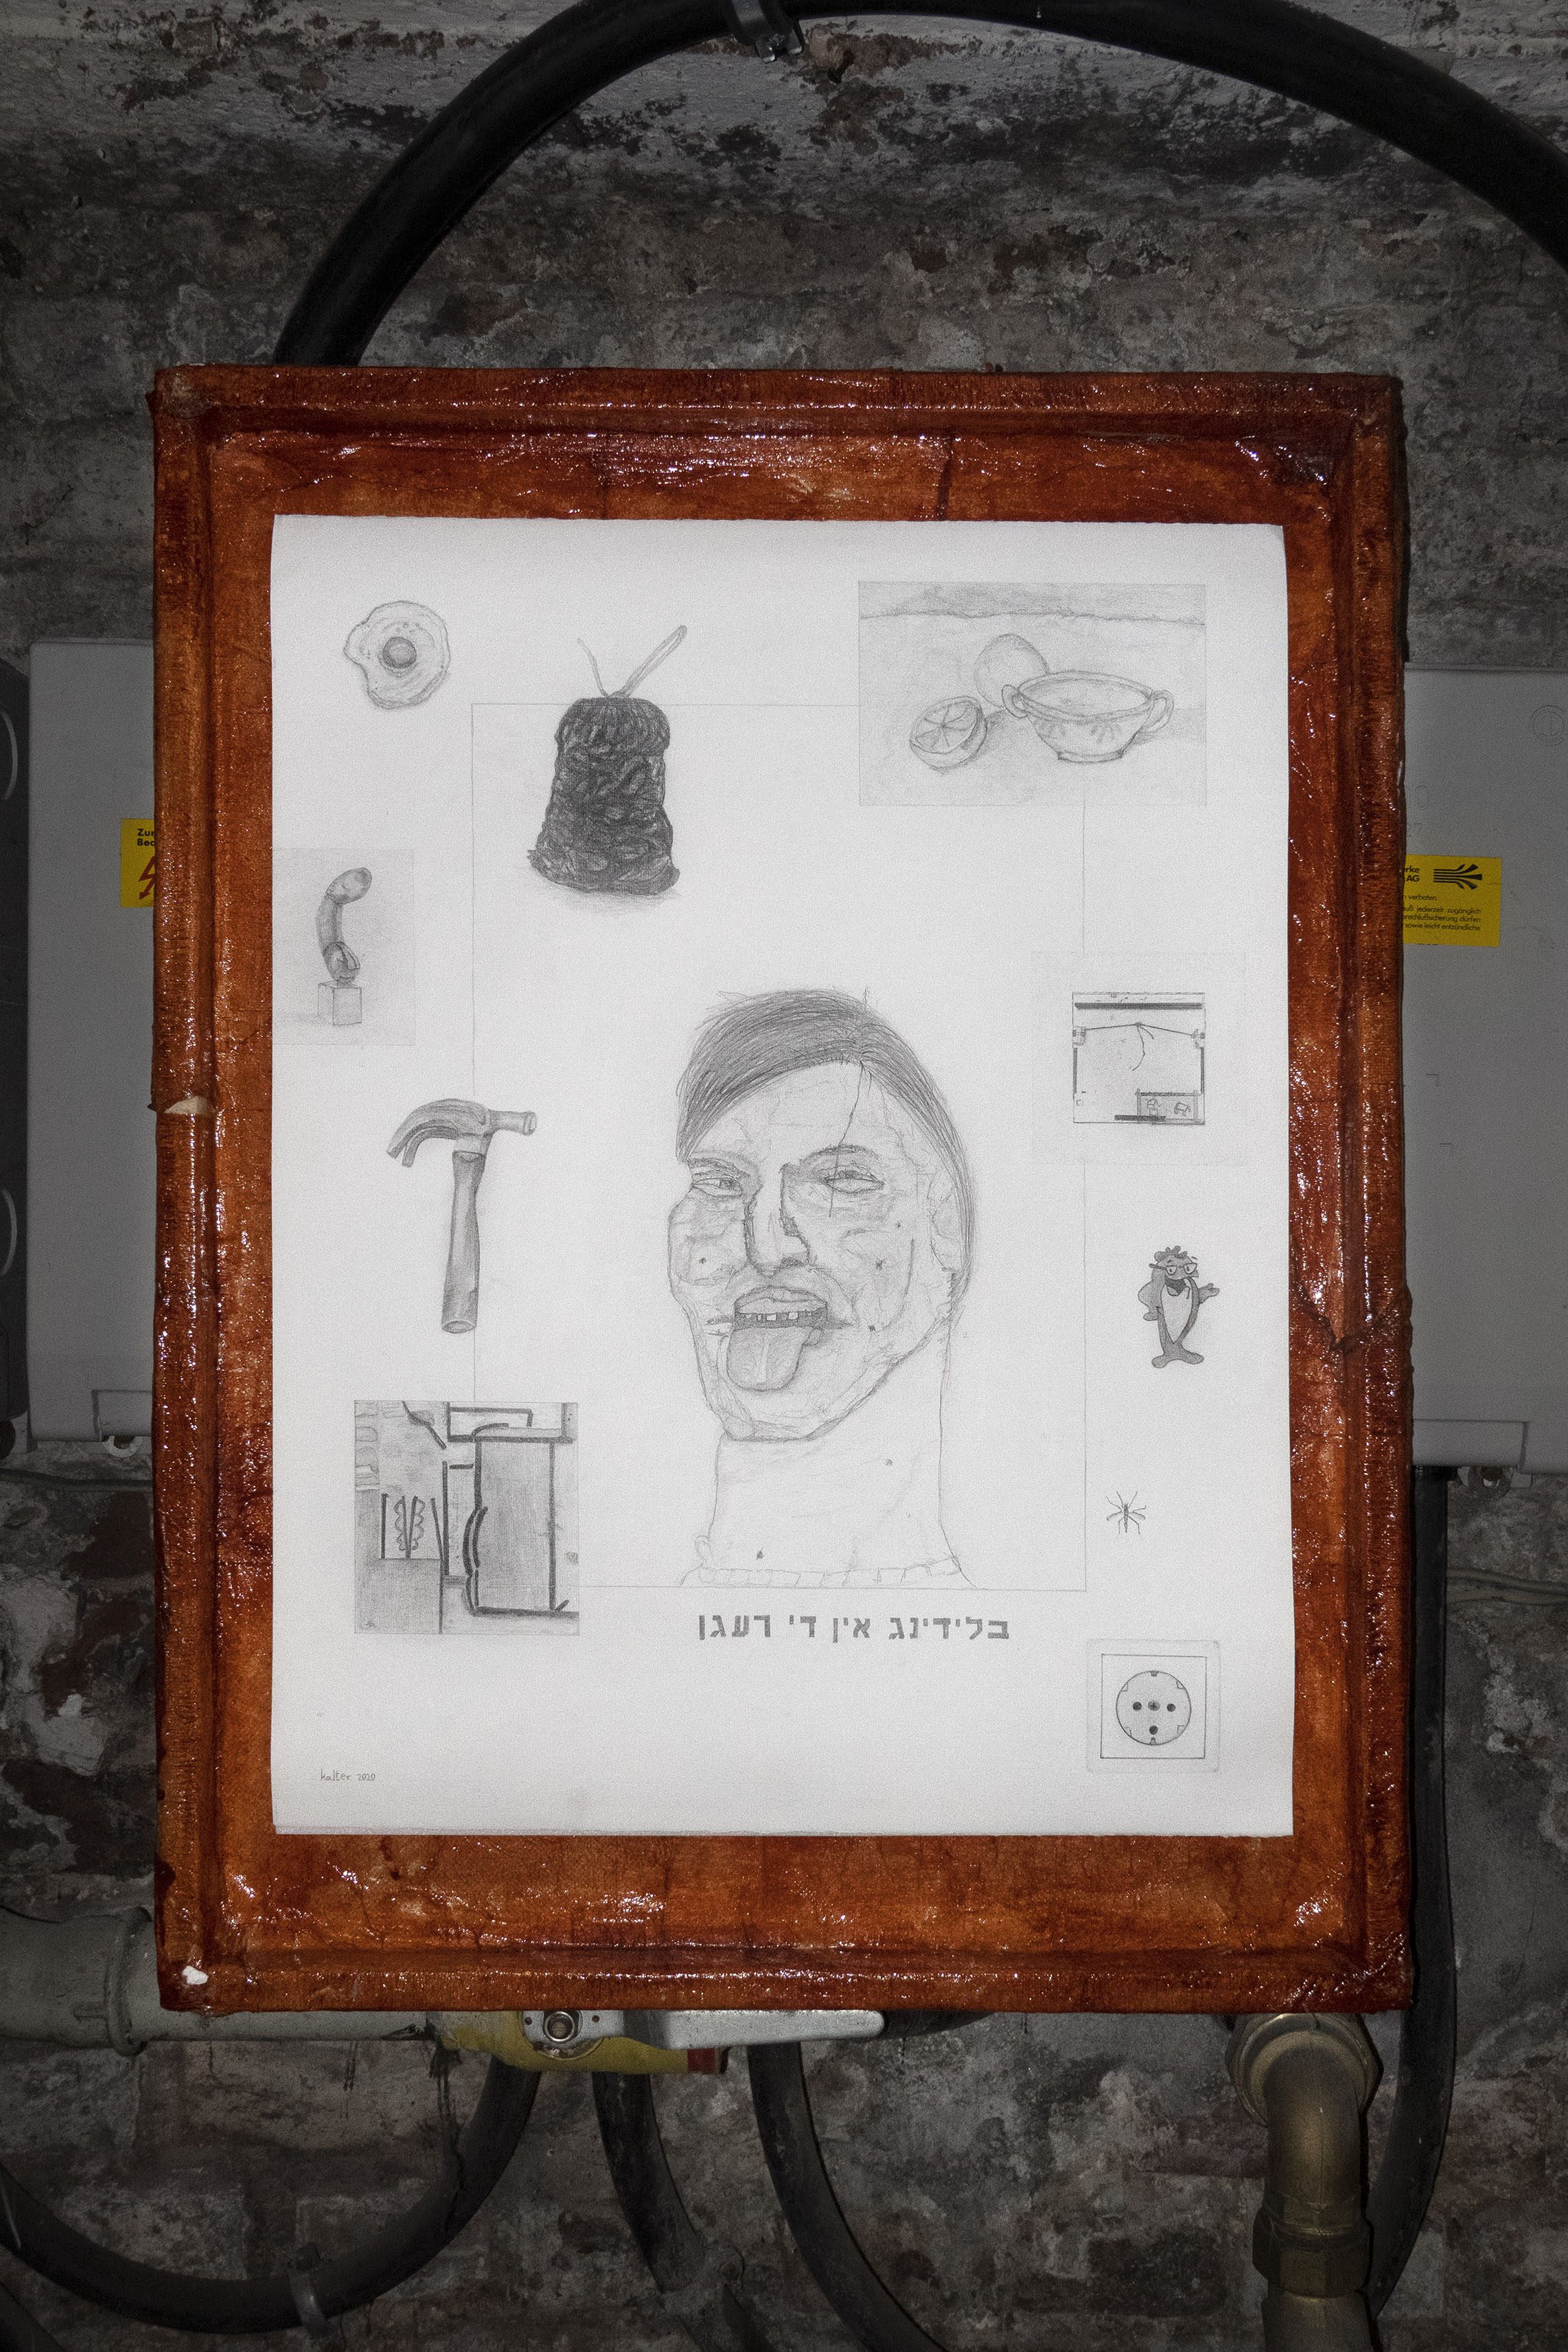 I. S. Kalter, "Bleeding In The Rain", 2020â€“22. Pencil and graphite on paper, artist frame, 65x50 cm (with frame, 80x60x4 cm)